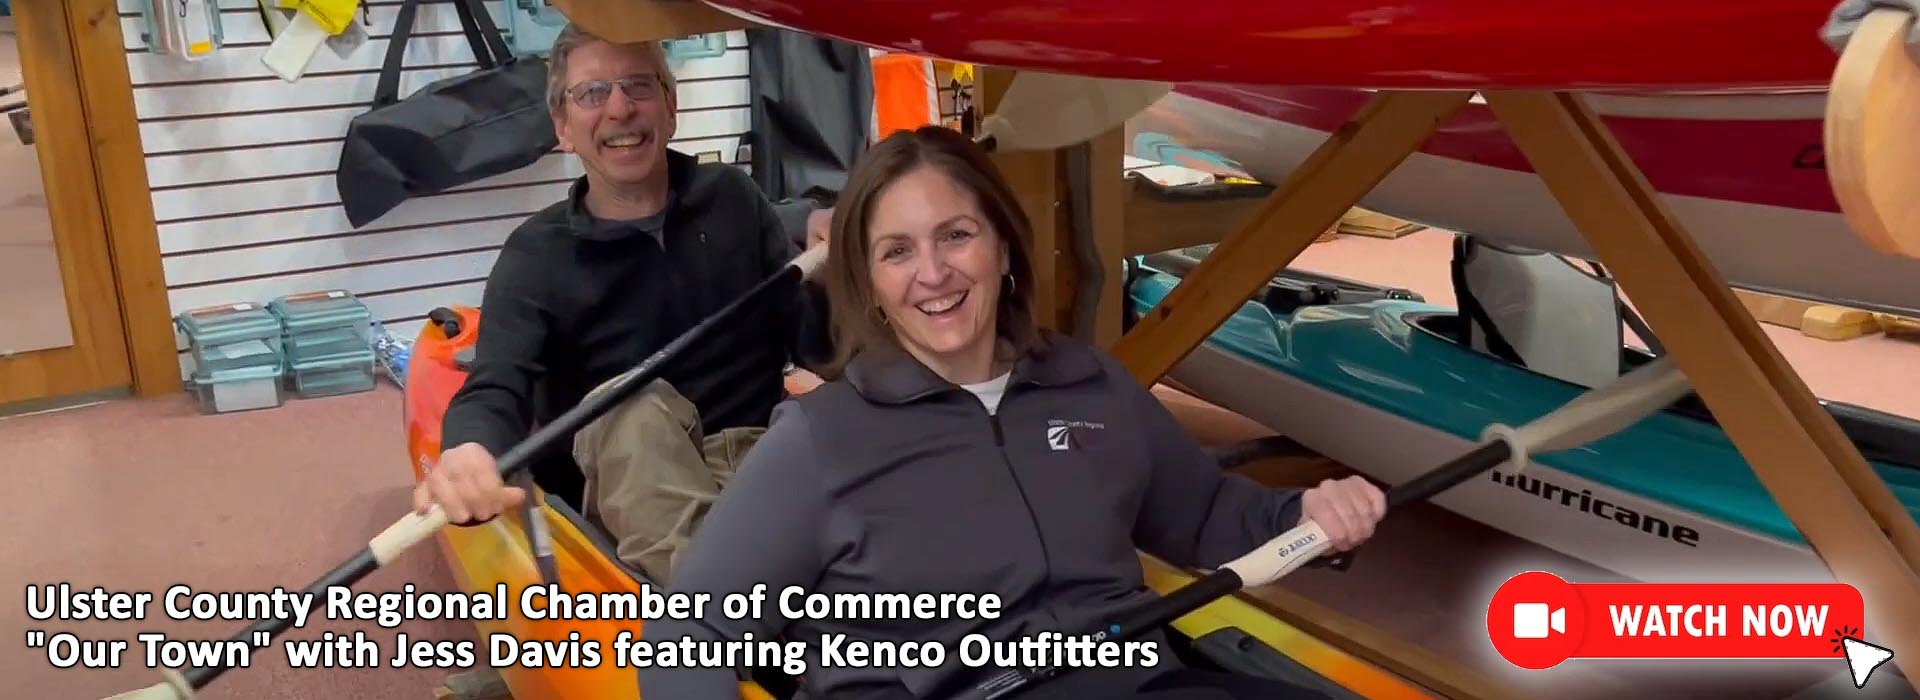 UCRCC Our Townm Featuring Kenco Outfitters. Store owner Bill Kennedy and Ulster County Regional Chamber of Commerce Director of Membership Jess Davis are seated in an orange, red and yellow swirled kayak holding kayaking paddles and pretending to kayak on our showroom floor. Bill is wearing glasses, a black halfzip fleece pullover and olive cargo pants. Jess is wearing a navy blue Ulster Chamber of Commerce fleece jacket and dark pants. They are both smiling. In the lower right corner is a video icon and watch now button. Clicking on this image will open a page to watch the Our Town episode on Kenco Outfitters